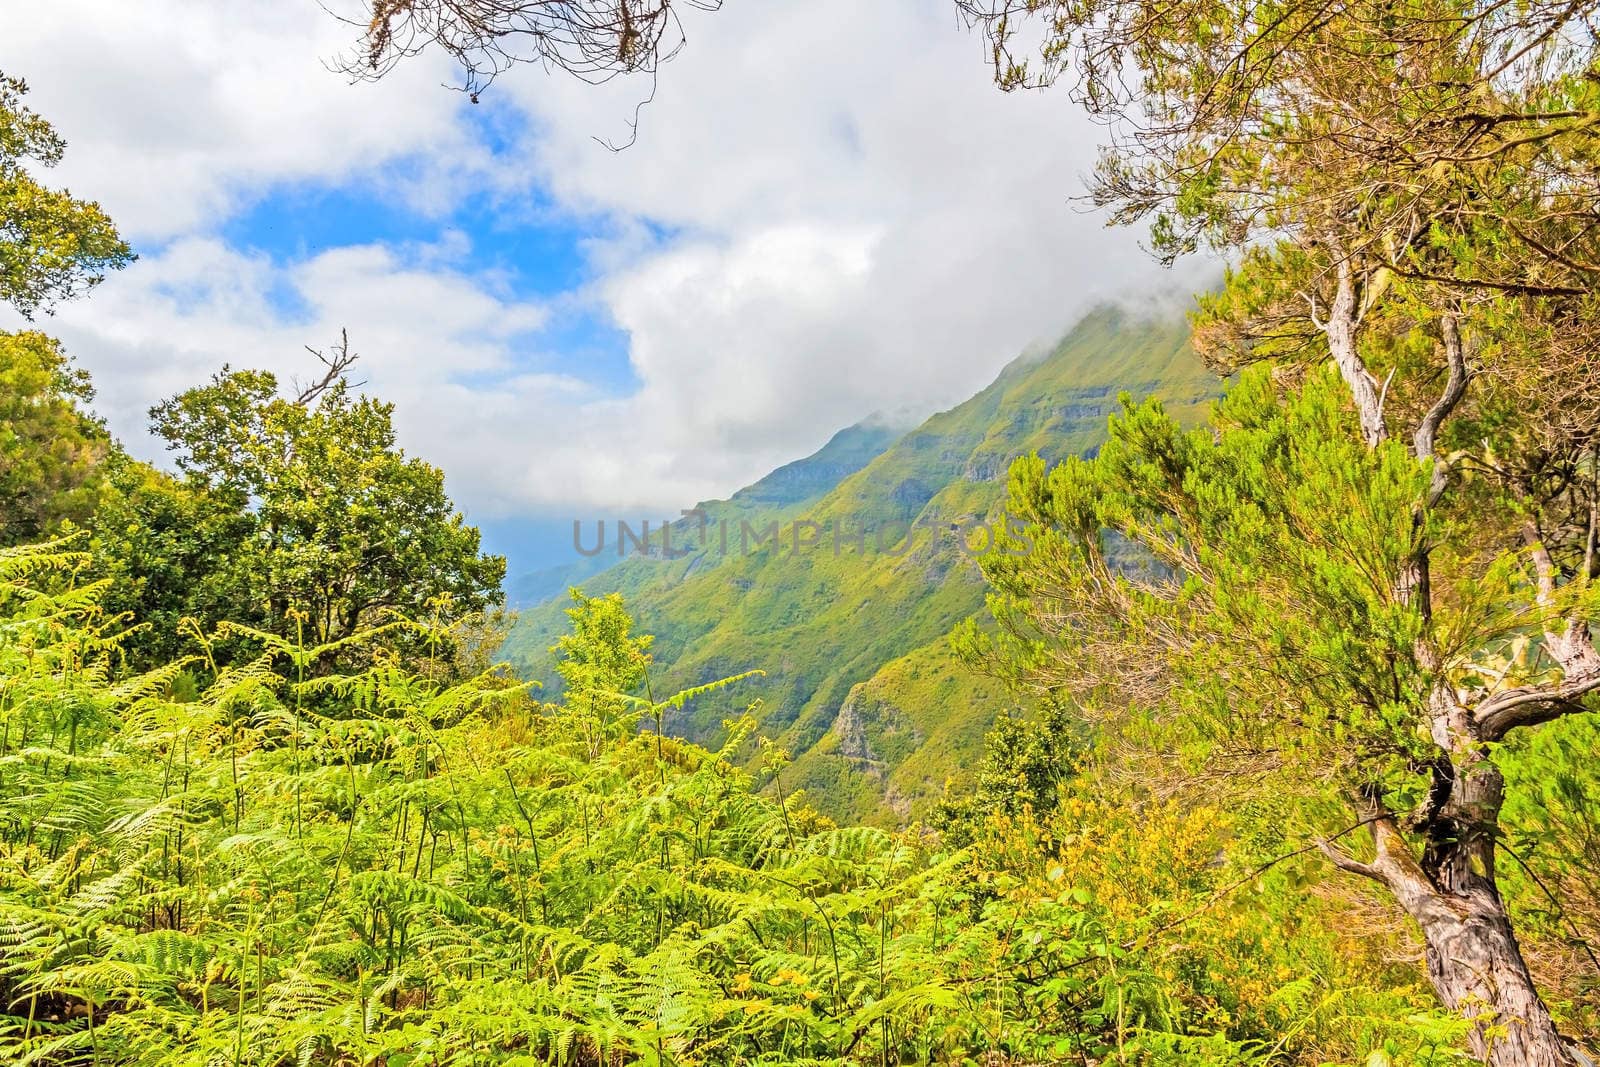 The magnificent inland of the island of Madeira